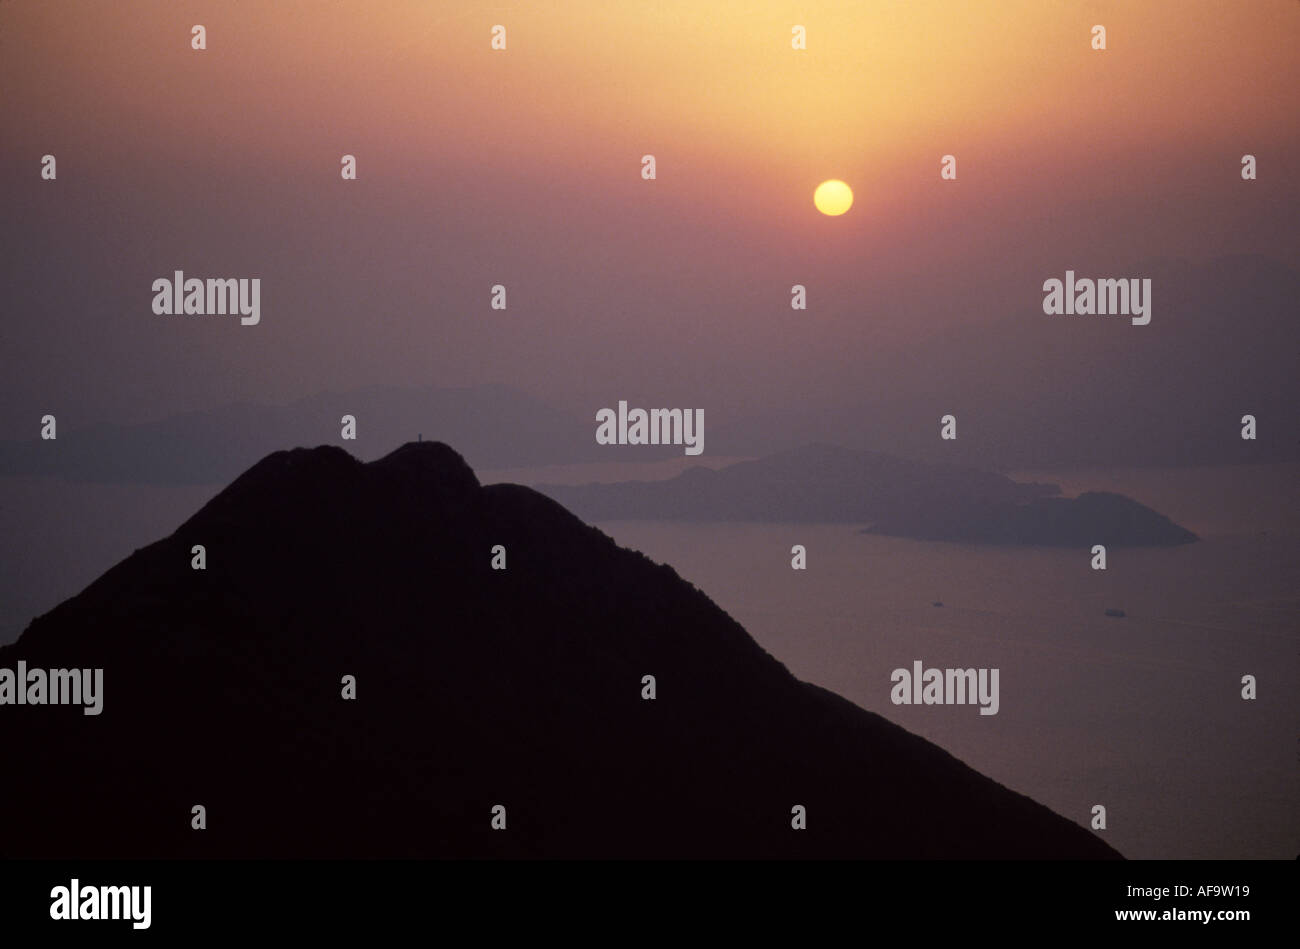 Hong Kong,Asia,Asian Asians ethnic immigrant immigrants minority,Far East,Eastern,Orient,Chinese,China,communism,communist,Victoria Peak,sunset,nature Stock Photo